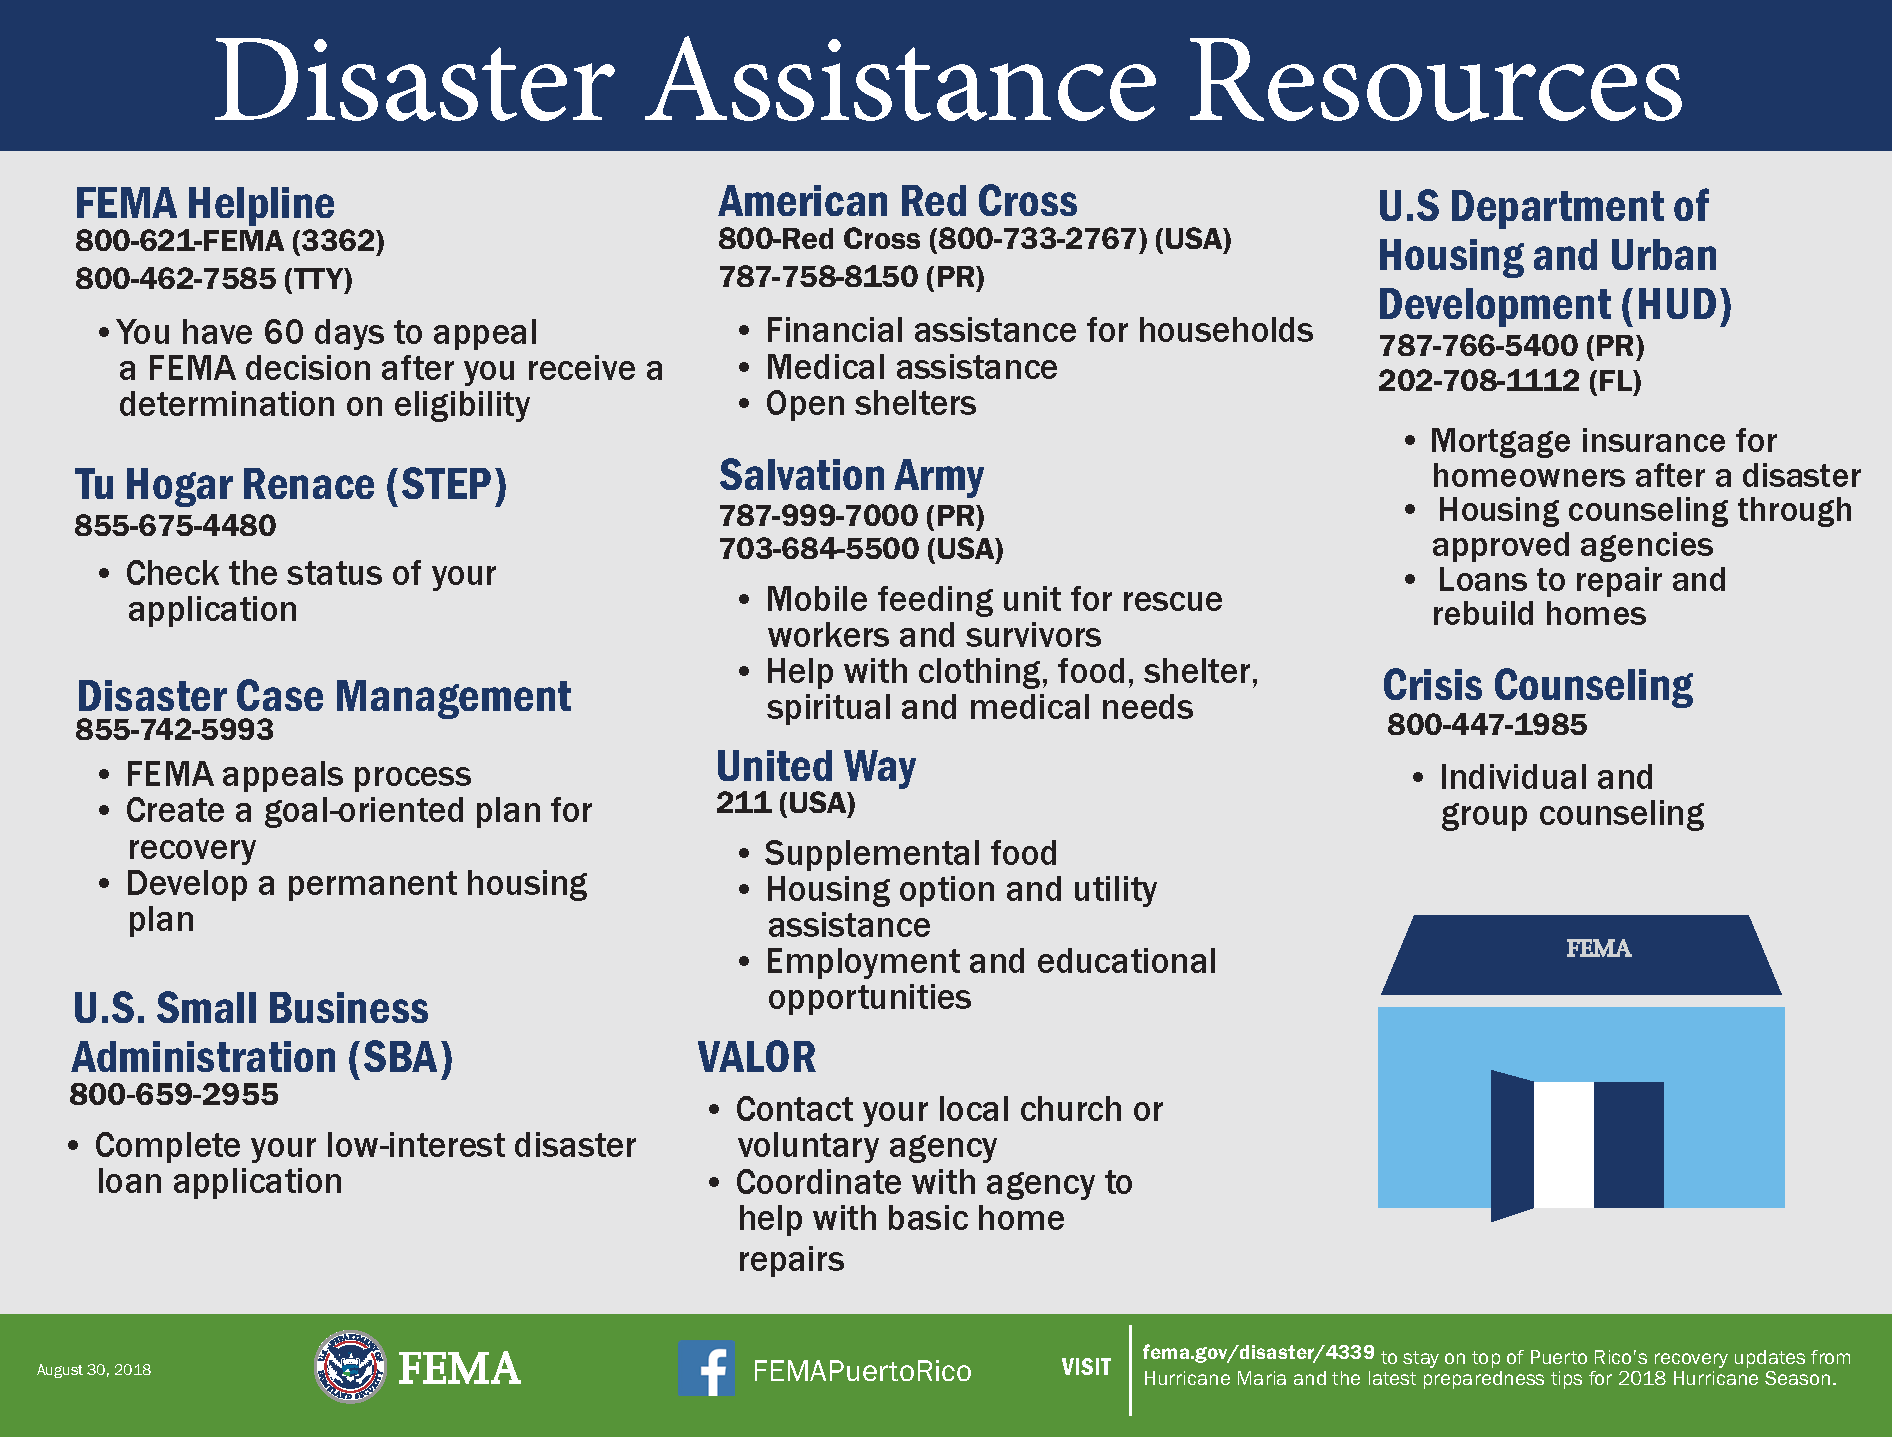 Disaster Assistance Resources•You have 60 days to appeala FEMA decision after you receive adetermination on eligibility• Check the status of yourapplication• Complete your low-interest disasterloan application• Financial assistance for households• Medical assistance• Open shelters• Individual and• Mortgage insurance forhomeowners after a disaster• Housing counseling throughapproved agencies• Loans to repair andrebuild homesgroup counselingVALOR• Contact your local church orvoluntary agency• Coordinate with agency tohelp with basic homerepairs211 (USA)United Way• Supplemental food• Mobile feeding unit for rescueworkers and survivors• Help with clothing, food, shelter,spiritual and medical needs• Housing option and utilityassistance• Employment and educationalopportunities• FEMA appeals process• Create a goal-oriented plan forrecovery• Develop a permanent housingplanVISIT fema.gov/disaster/4339 to stay on top of Puerto Rico’s recovery updates from